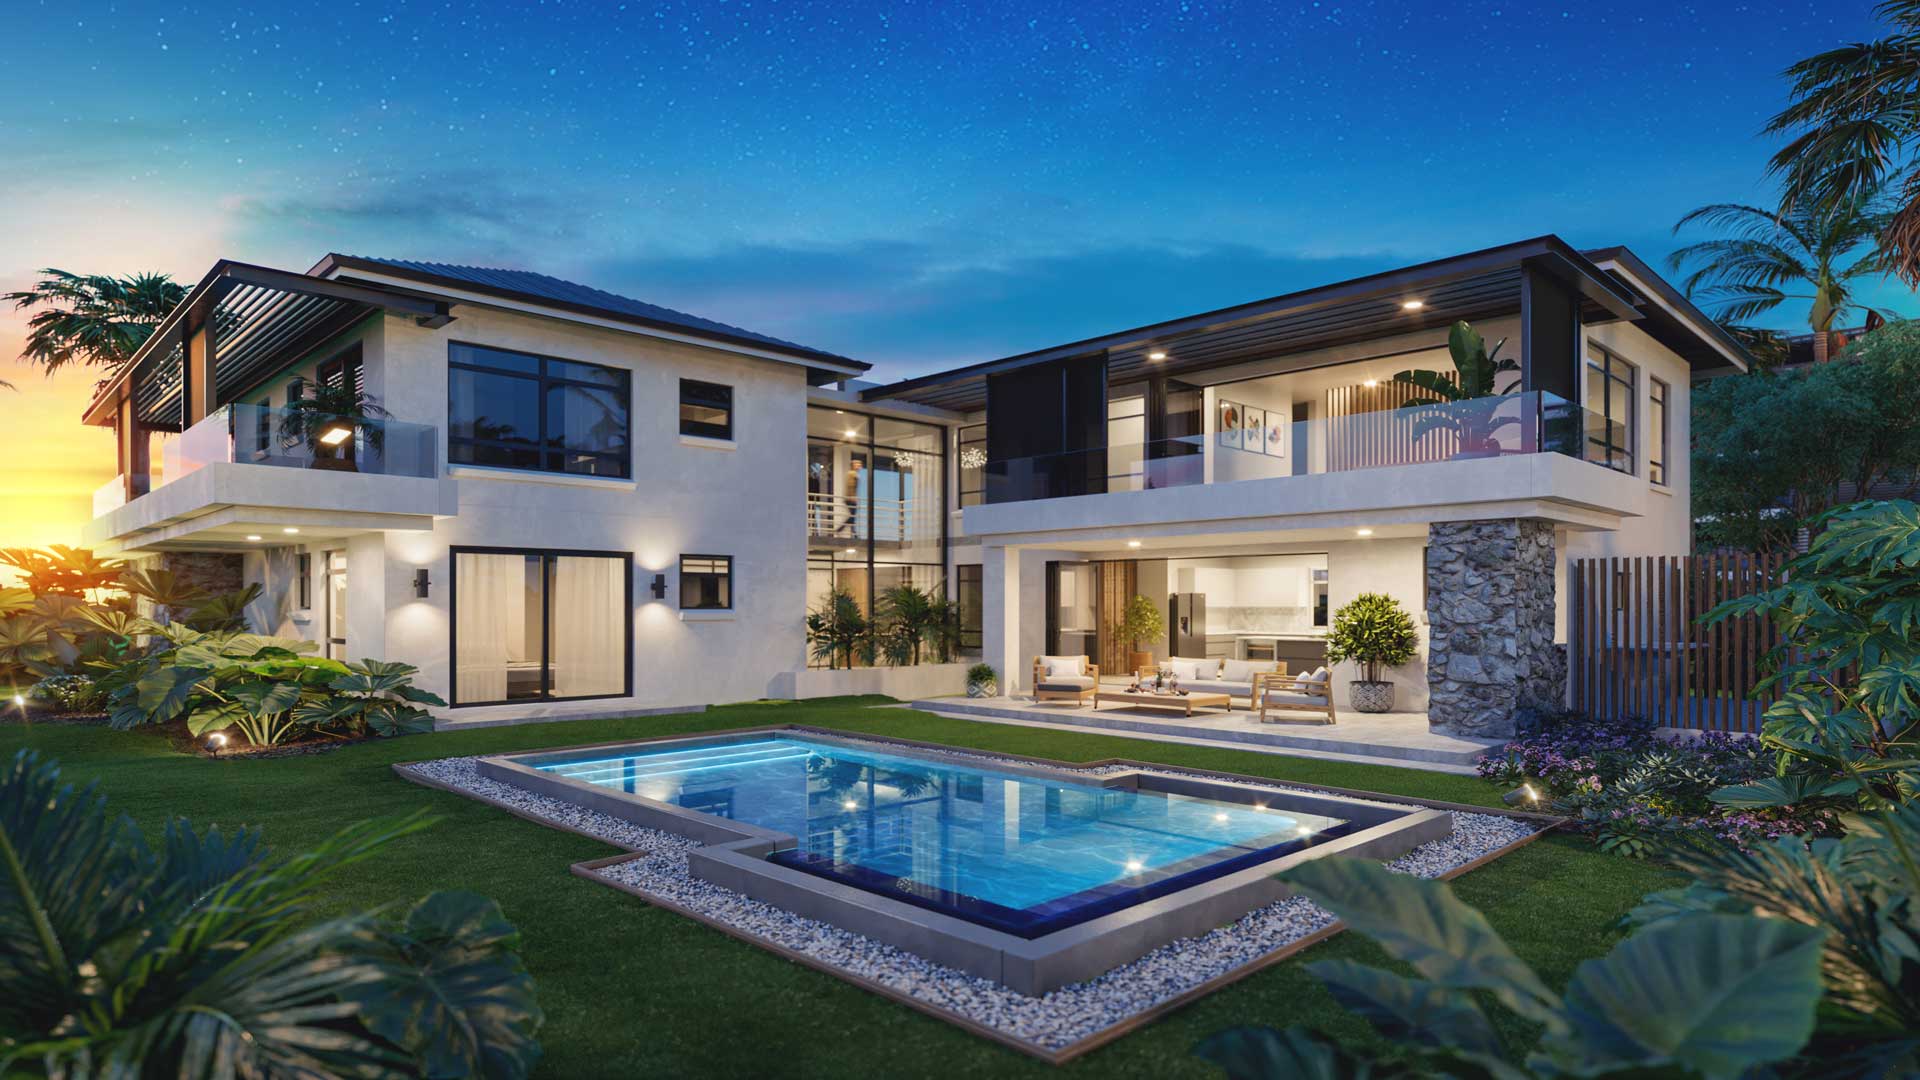 Exterior view of the luxury villa in the PDS AMARI BAY development in Tamarin, Mauritius by Westimmo Luxury Real Estate Mauritius